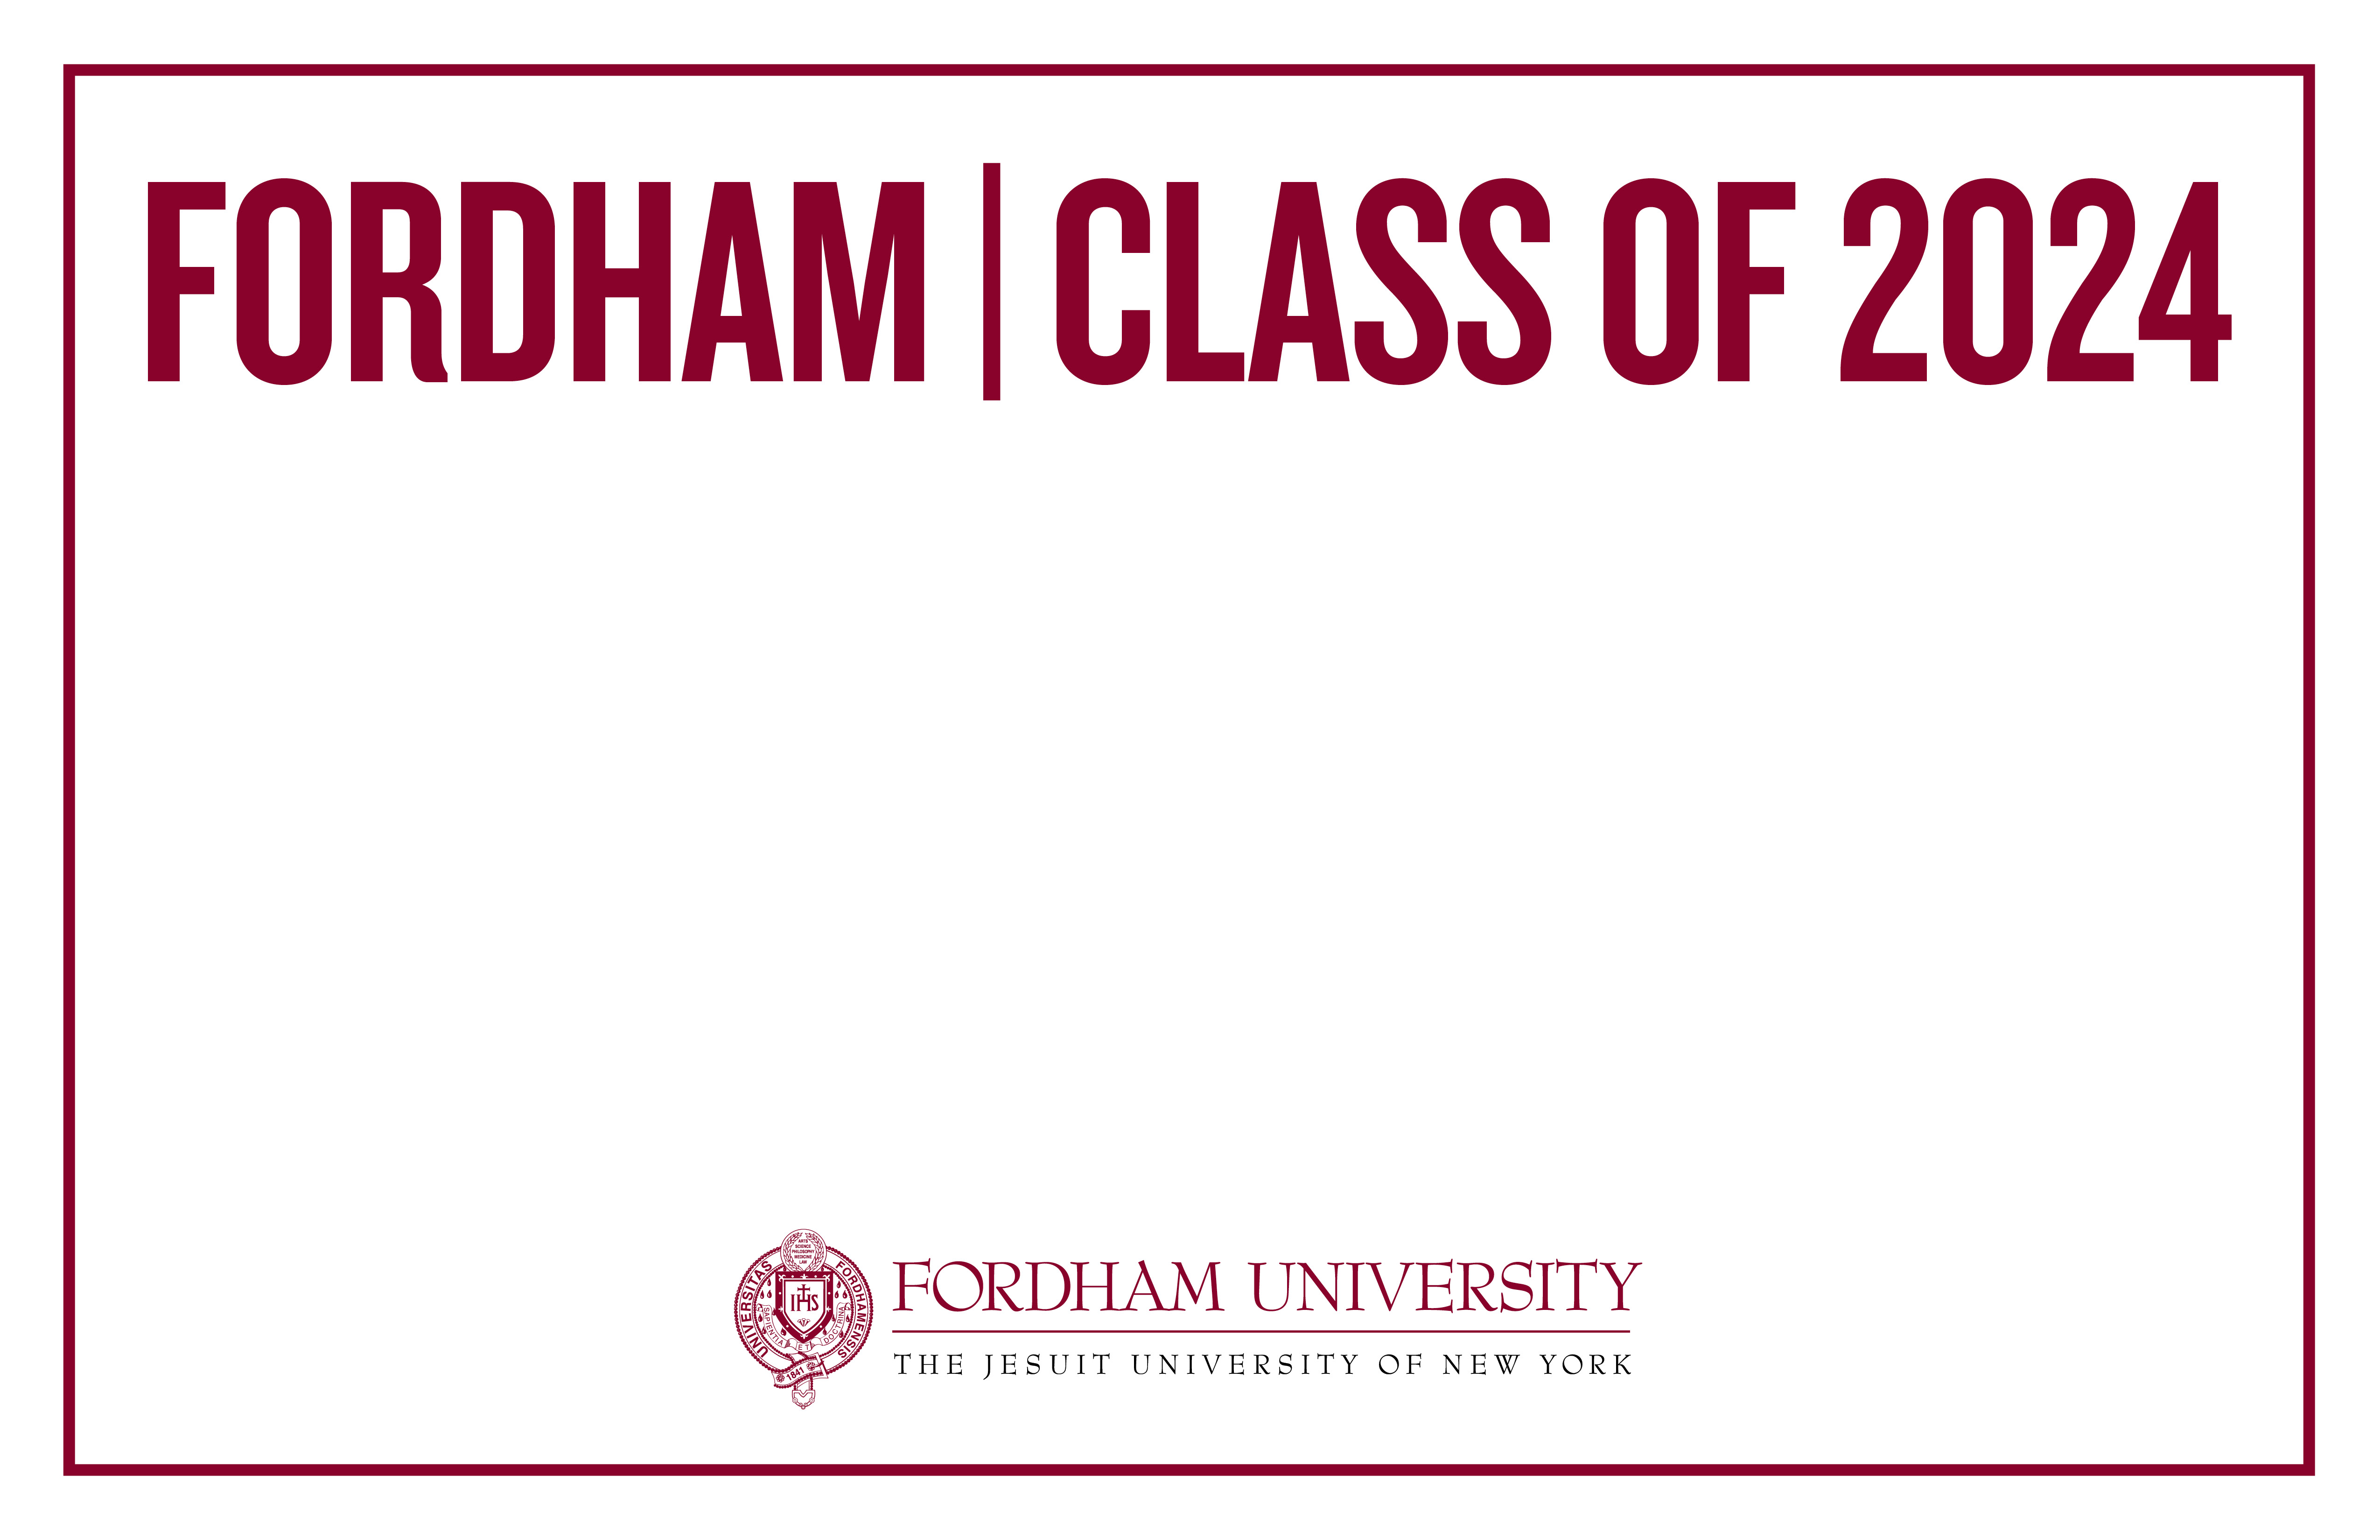 Fordham Class of 2024 Lawn and Window sign